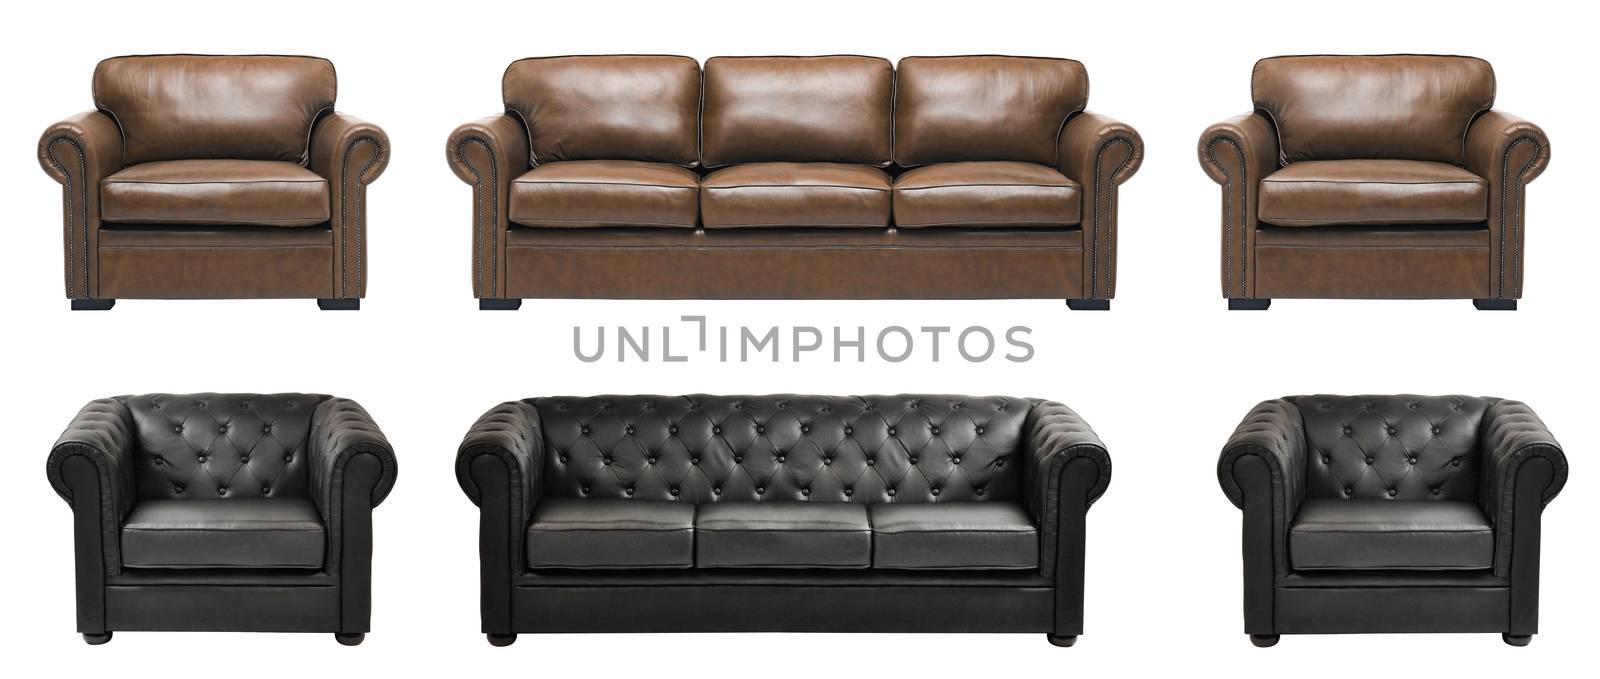 Nice and luxury leather sofa with armchairs by ozaiachin